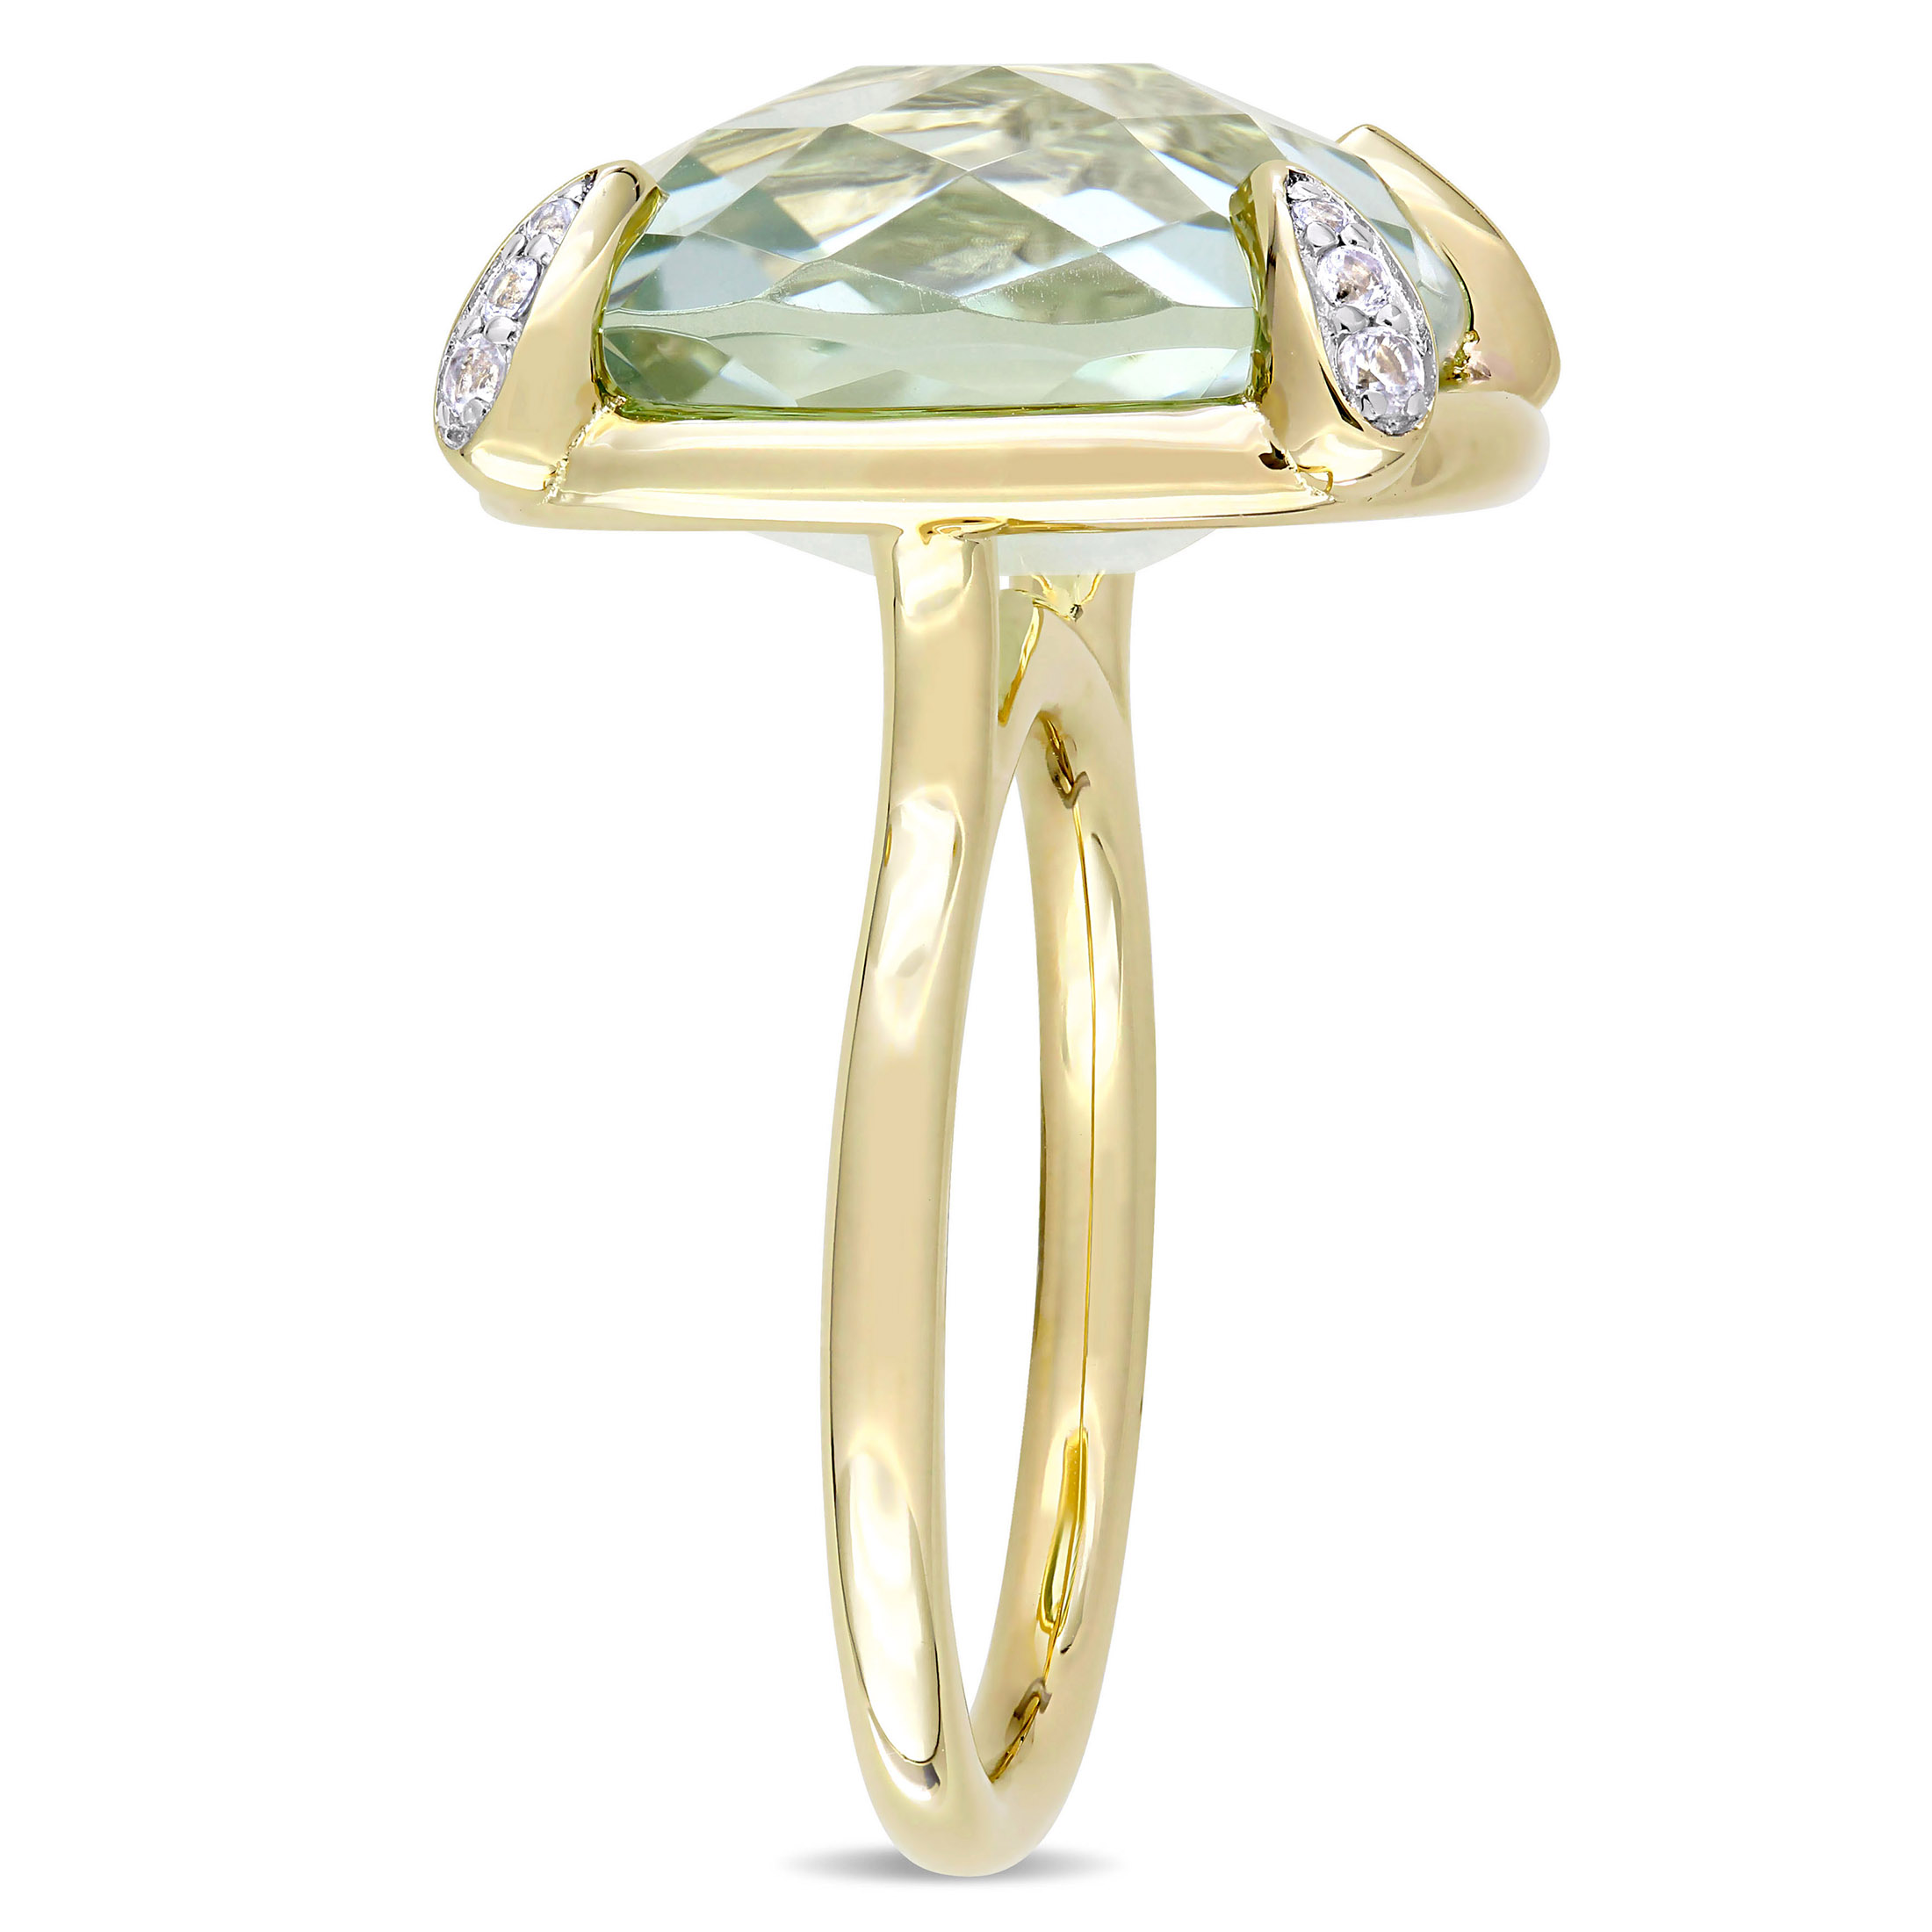 Miabella Women's 15-1/8 Carat T.G.W. Cushion Double Checkerboard-Cut Green Quartz and Round-Cut White Sapphire 14kt Yellow Gold Cocktail Ring - image 3 of 7